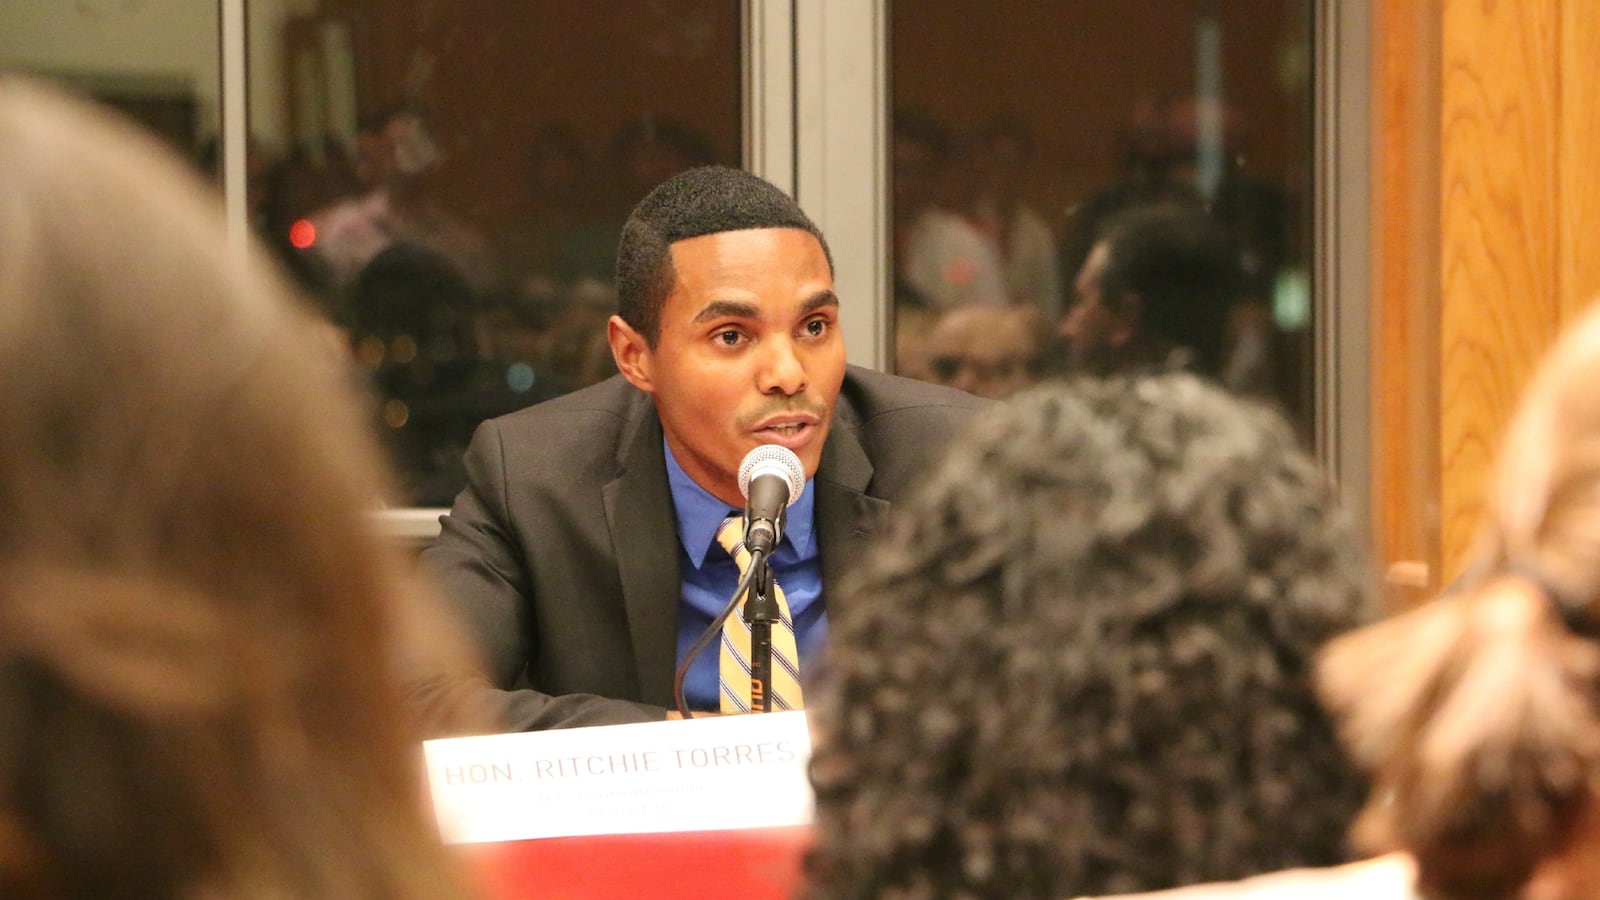 City Councilman Ritchie Torres said he did not think the city would have taken the steps it has to address school segregation were it not under pressure from advocates.